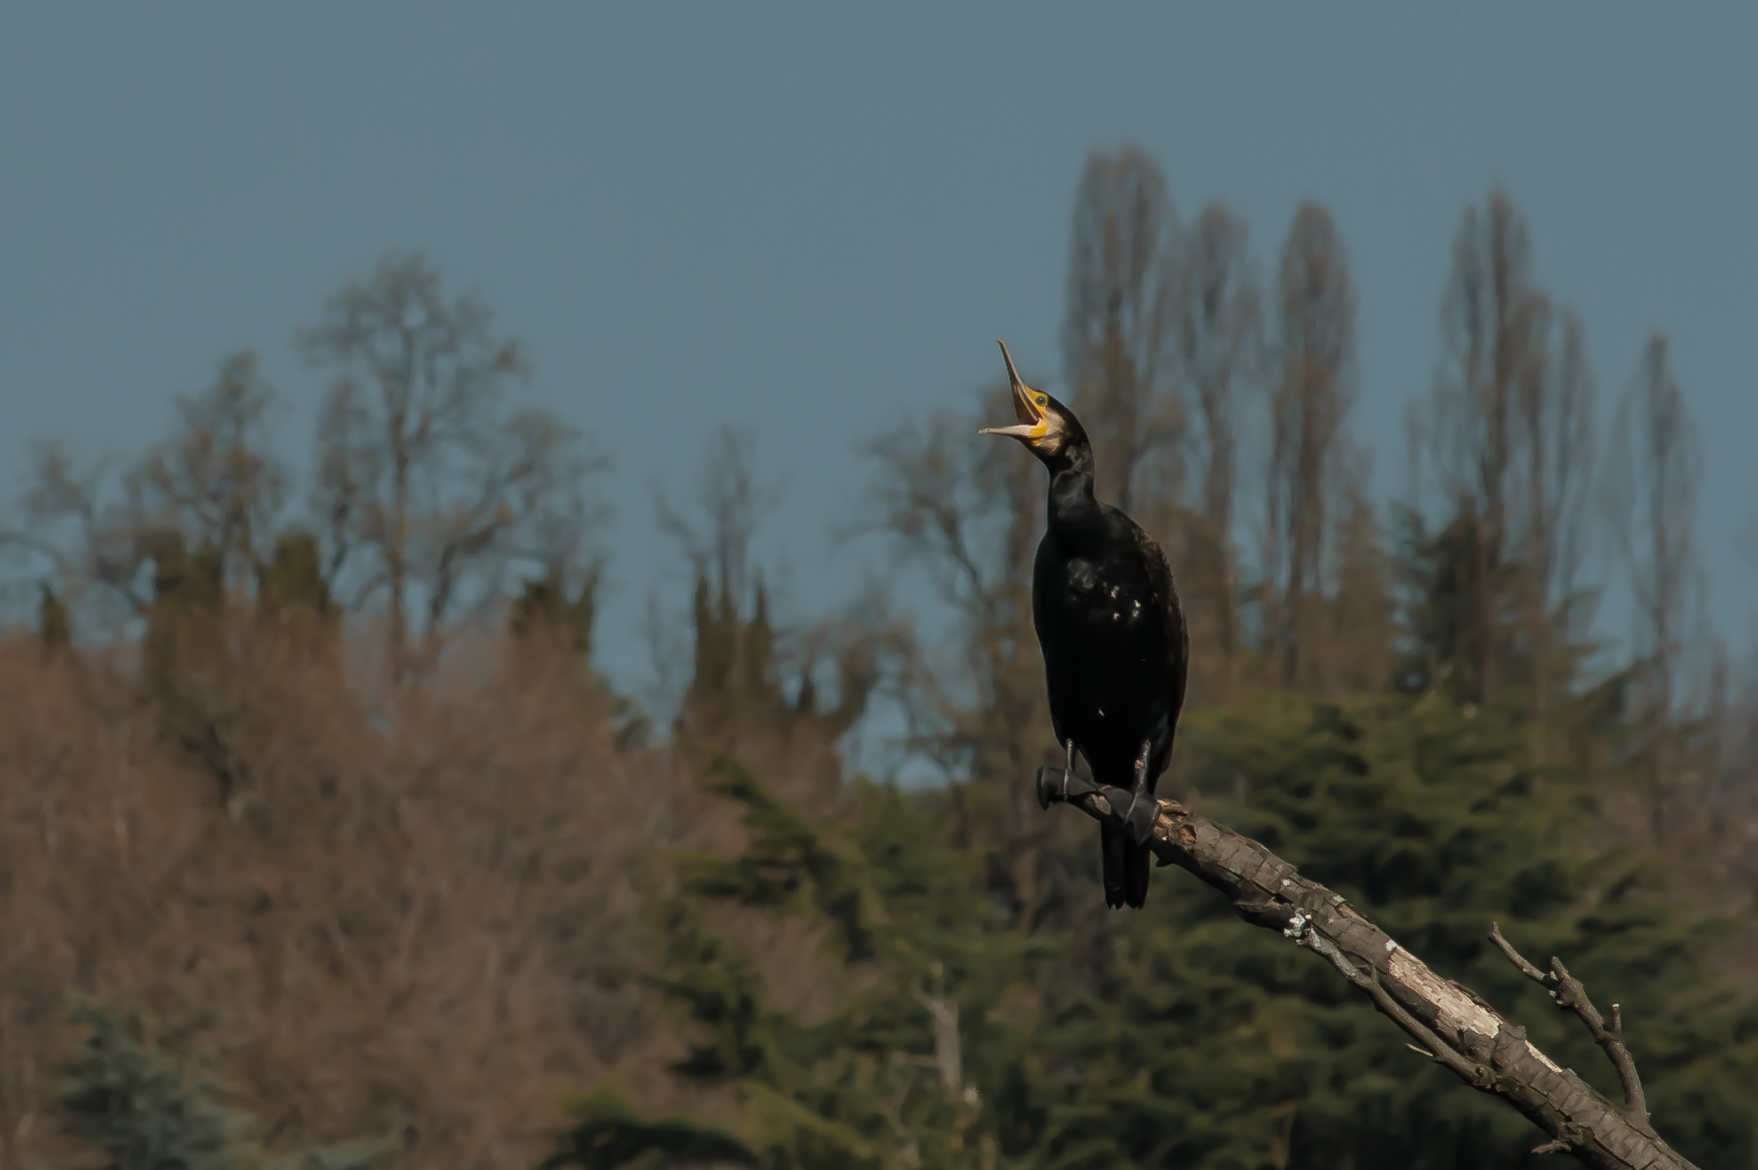 The yawning of the Cormorate...